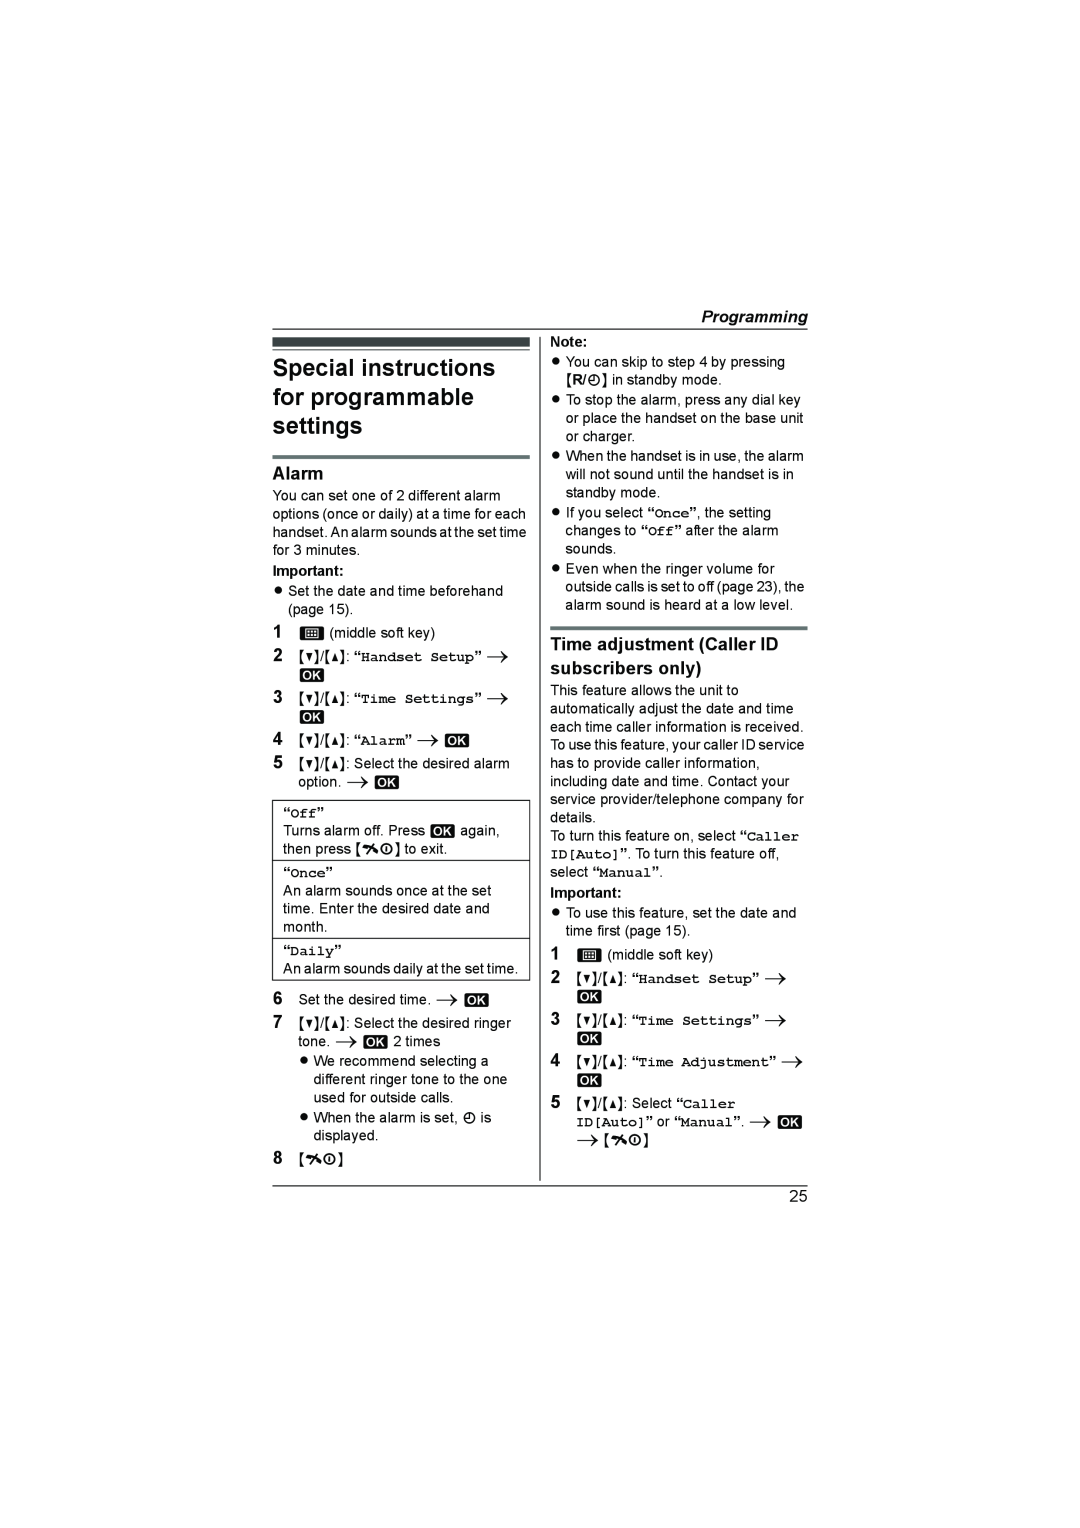 Panasonic KX-TG7341NZ Special instructions for programmable settings, Alarm, Time adjustment Caller ID subscribers only 